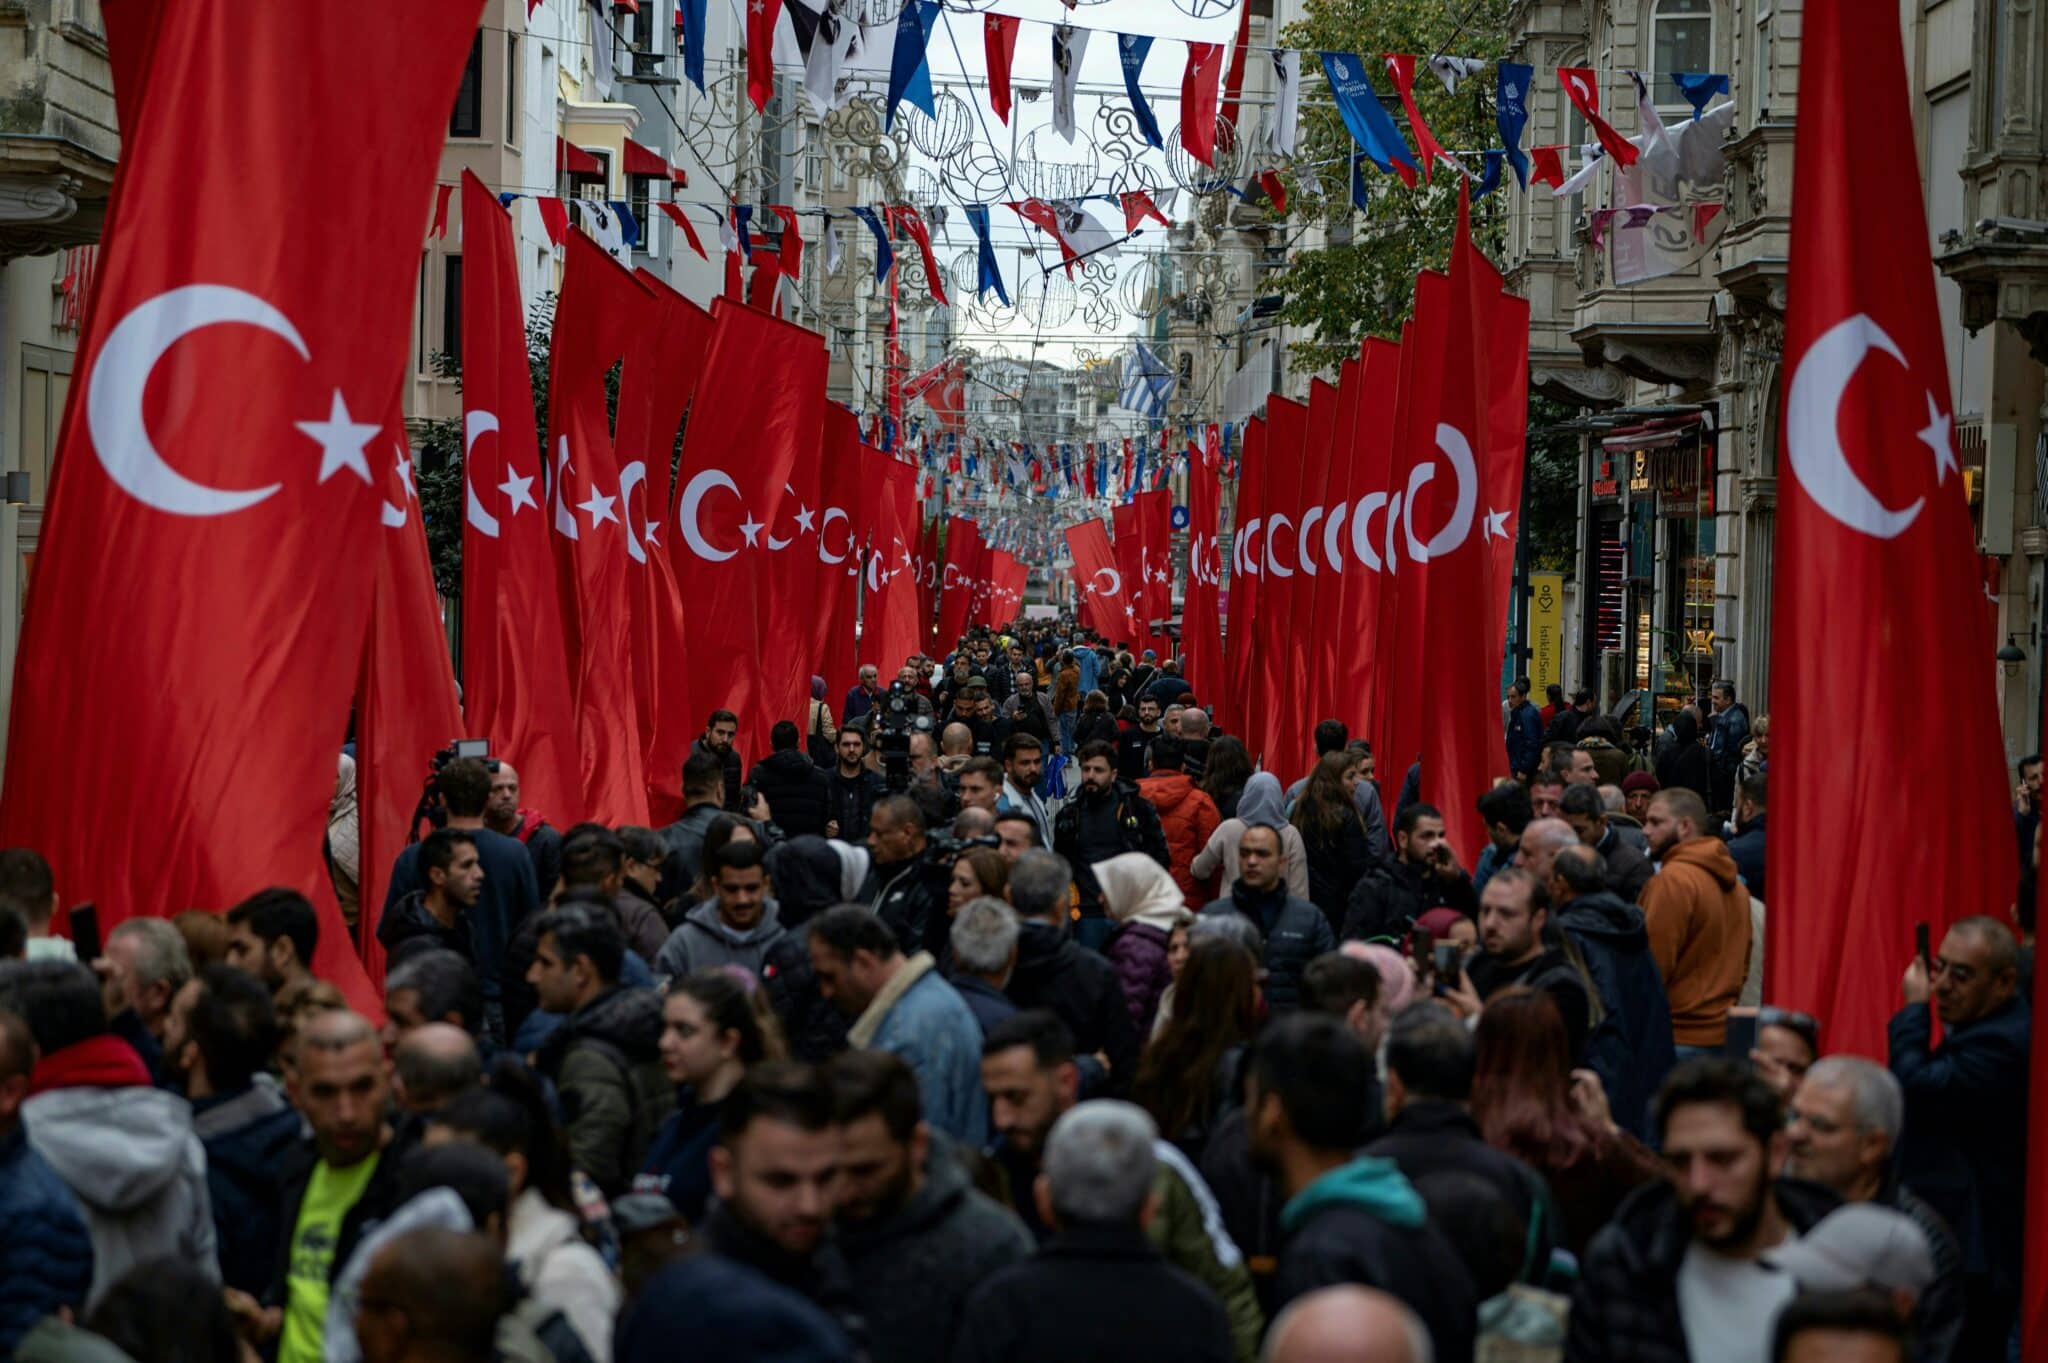 TOPSHOT - Pedestrians walk through Istiklal street in Istanbul, adorned all along with Turkish national flags on November 14, 2022 one day after a bomb killed six people in the busy central shopping street of the Turkish capital. - Turkey's interior minister accused the outlawed Kurdistan Workers' Party (PKK) on November 14, of responsibility for a bombing in a busy Istanbul street that killed six people and wounded scores, saying more than 20 people have been arrested. (Photo by Yasin AKGUL / AFP) (Photo by YASIN AKGUL/AFP via Getty Images)